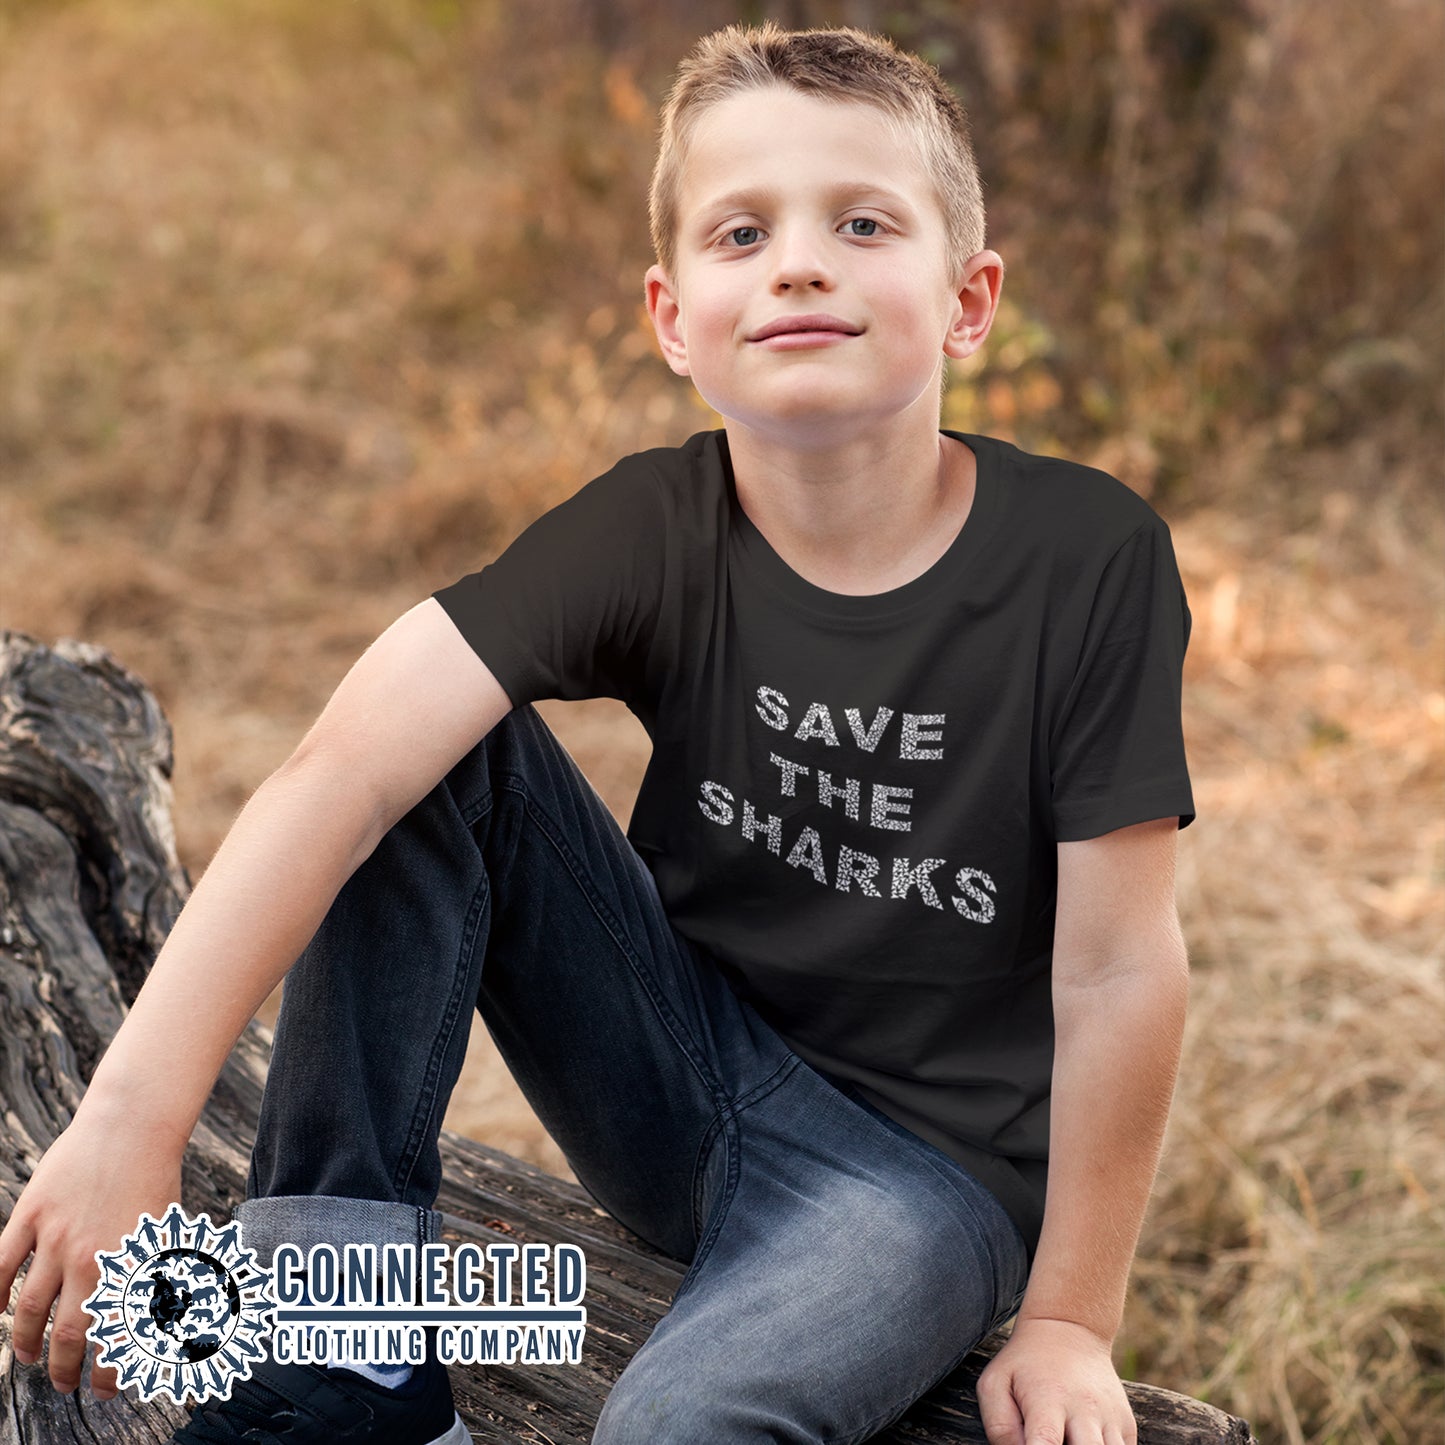 Boy Model Wearing Black Save The Sharks Youth Short-Sleeve Tee - Connected Clothing Company - 10% of profits donated to Oceana shark conservation